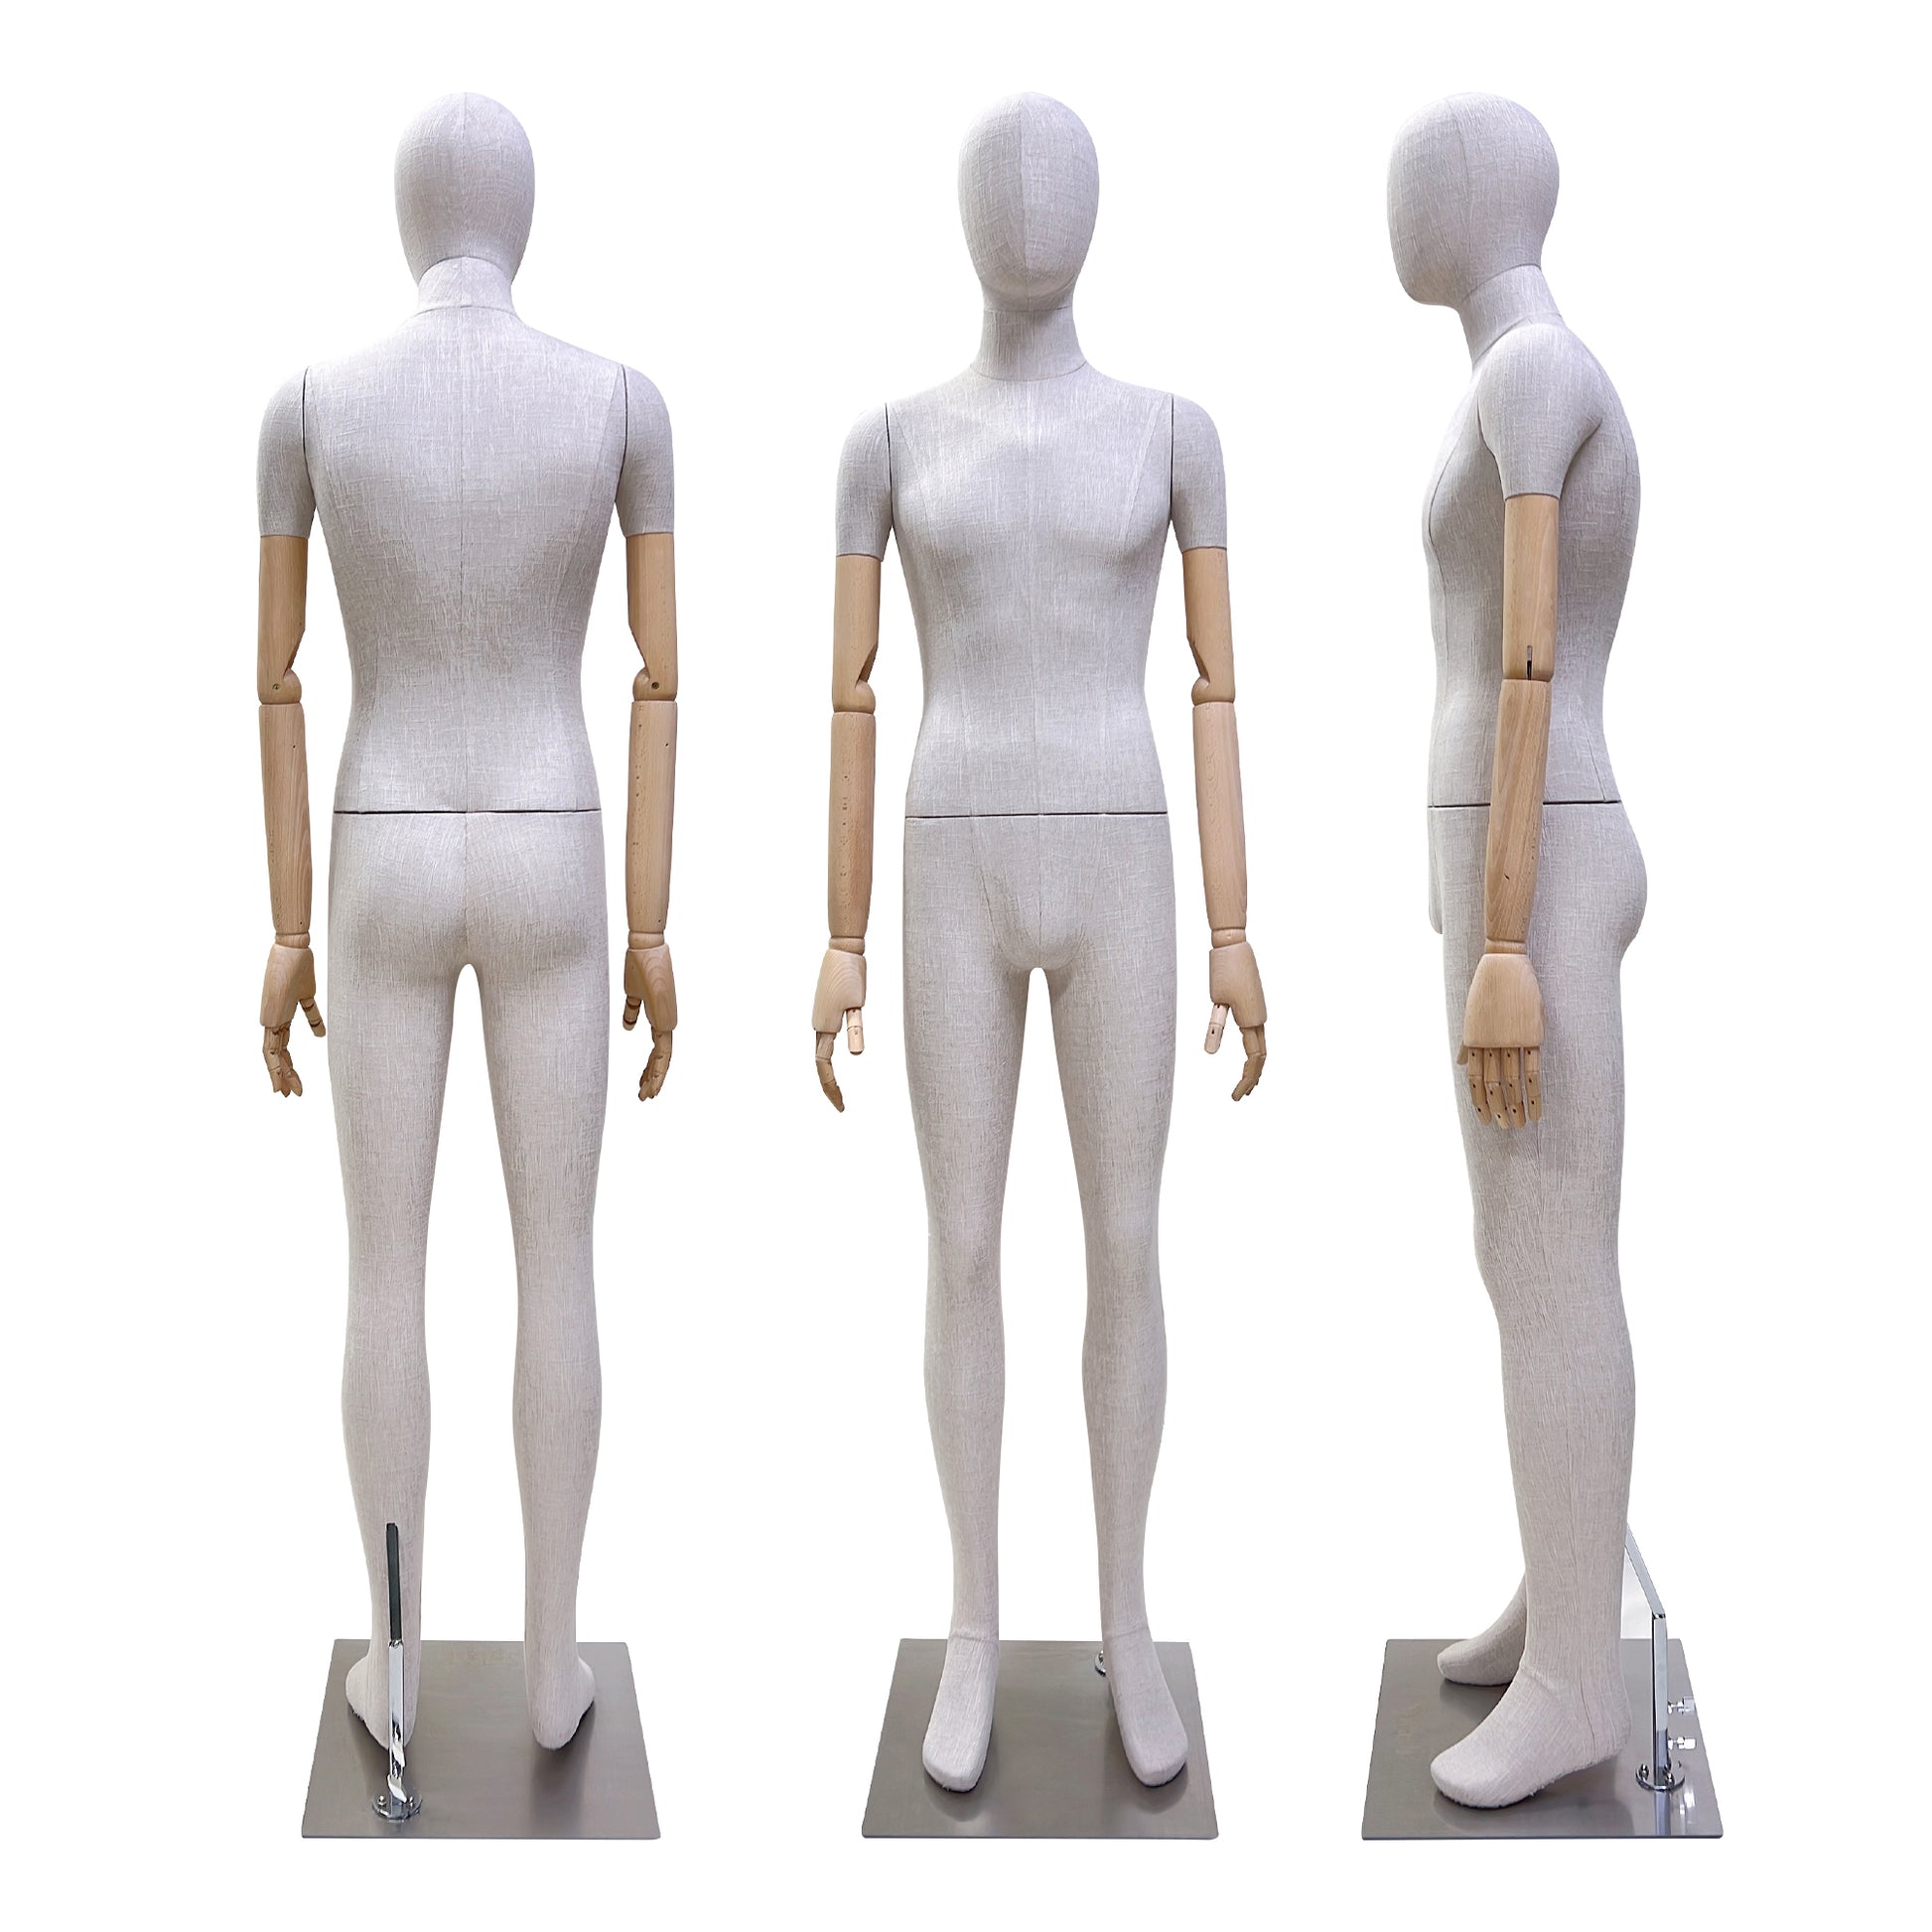 New Luxury Style LInen Mannequin,Female/Male Full Body/Half Body Mannequin,Wedding Dress Display,Mannequin for Clothes Show,Shop Display De-Liang Dress Forms